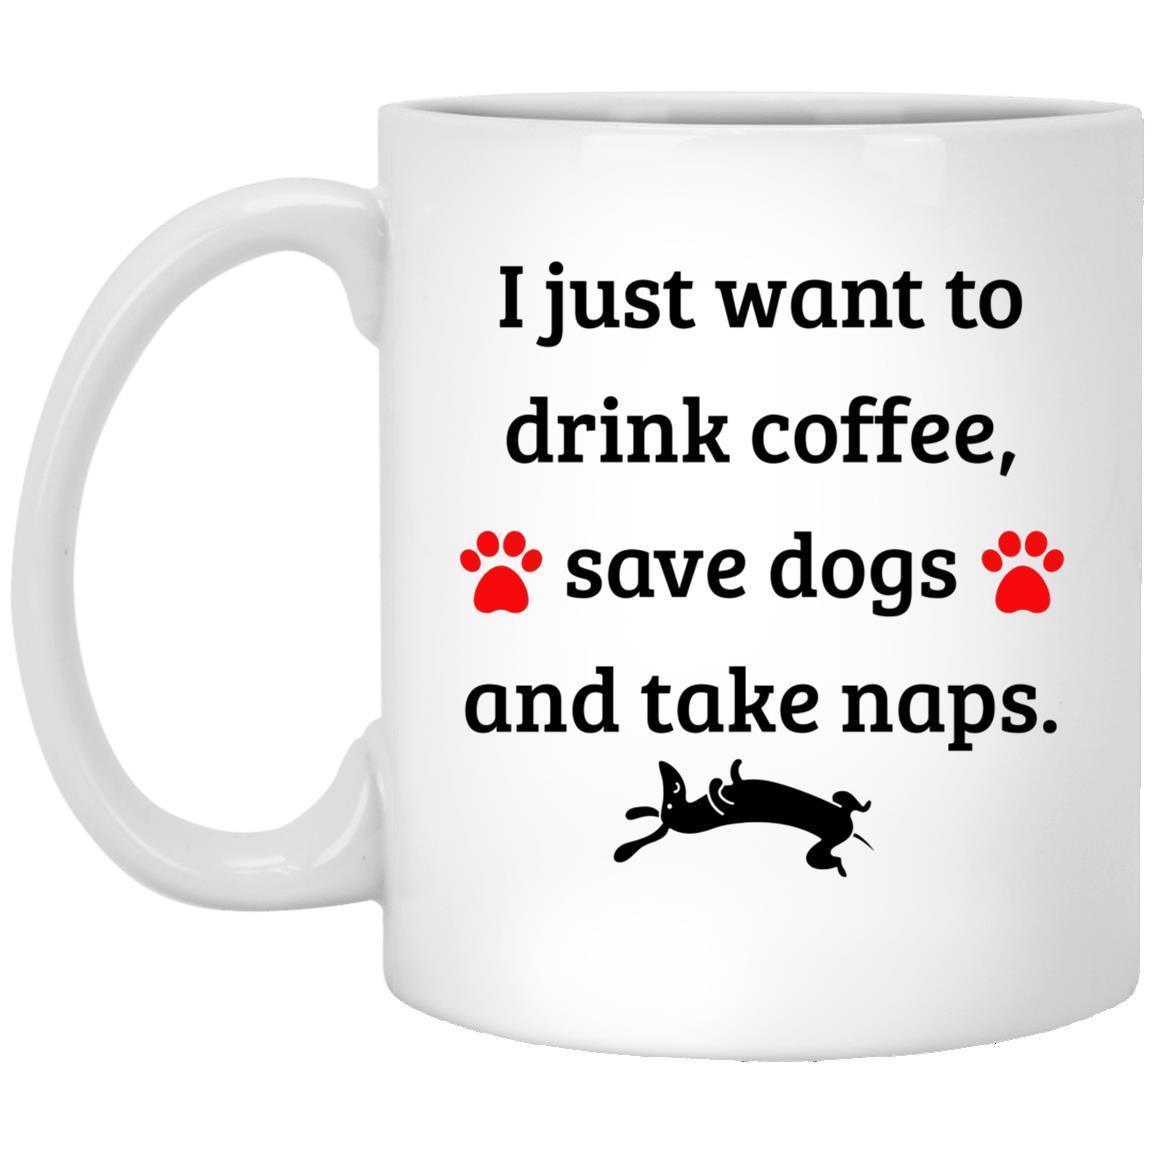 I Just Want to Drink Coffee Save Dogs and Take Naps Mug